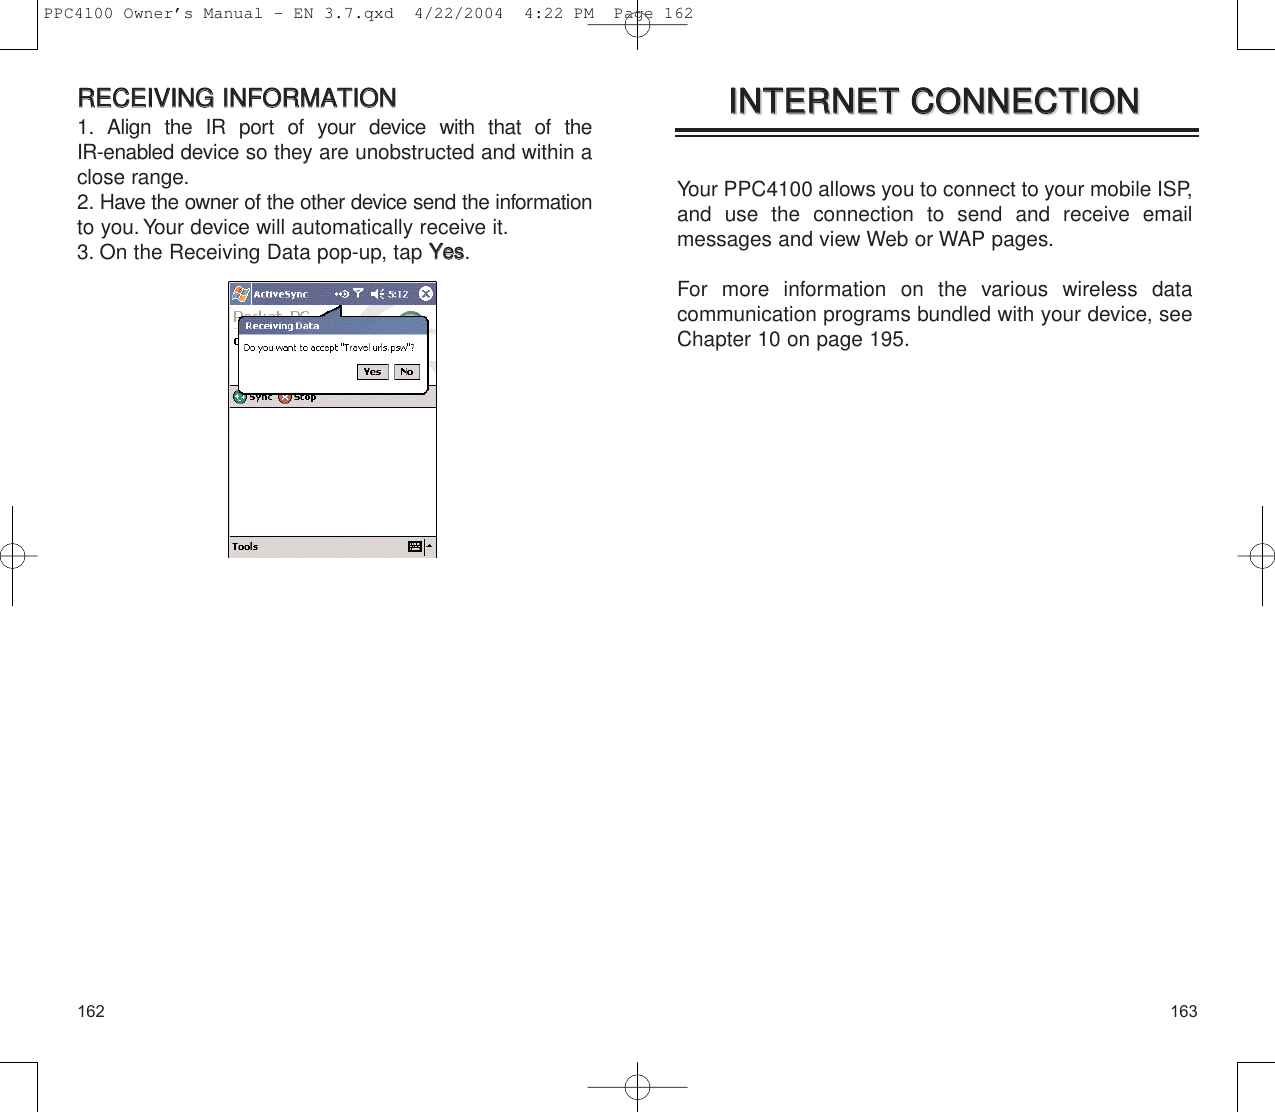 163162Your PPC4100 allows you to connect to your mobile ISP,and use the connection to send and receive email messages and view Web or WAP pages.For more information on the various wireless data communication programs bundled with your device, seeChapter 10 on page 195.IINNTTEERRNNEETT  CCOONNNNEECCTTIIOONNIINNTTEERRNNEETT  CCOONNNNEECCTTIIOONNRREECCEEIIVVIINNGG  IINNFFOORRMMAATTIIOONN1. Align the IR port of your device with that of the IR-enabled device so they are unobstructed and within aclose range.2. Have the owner of the other device send the informationto you.Your device will automatically receive it.3. On the Receiving Data pop-up, tap YYeess.PPC4100 Owner’s Manual - EN 3.7.qxd  4/22/2004  4:22 PM  Page 162